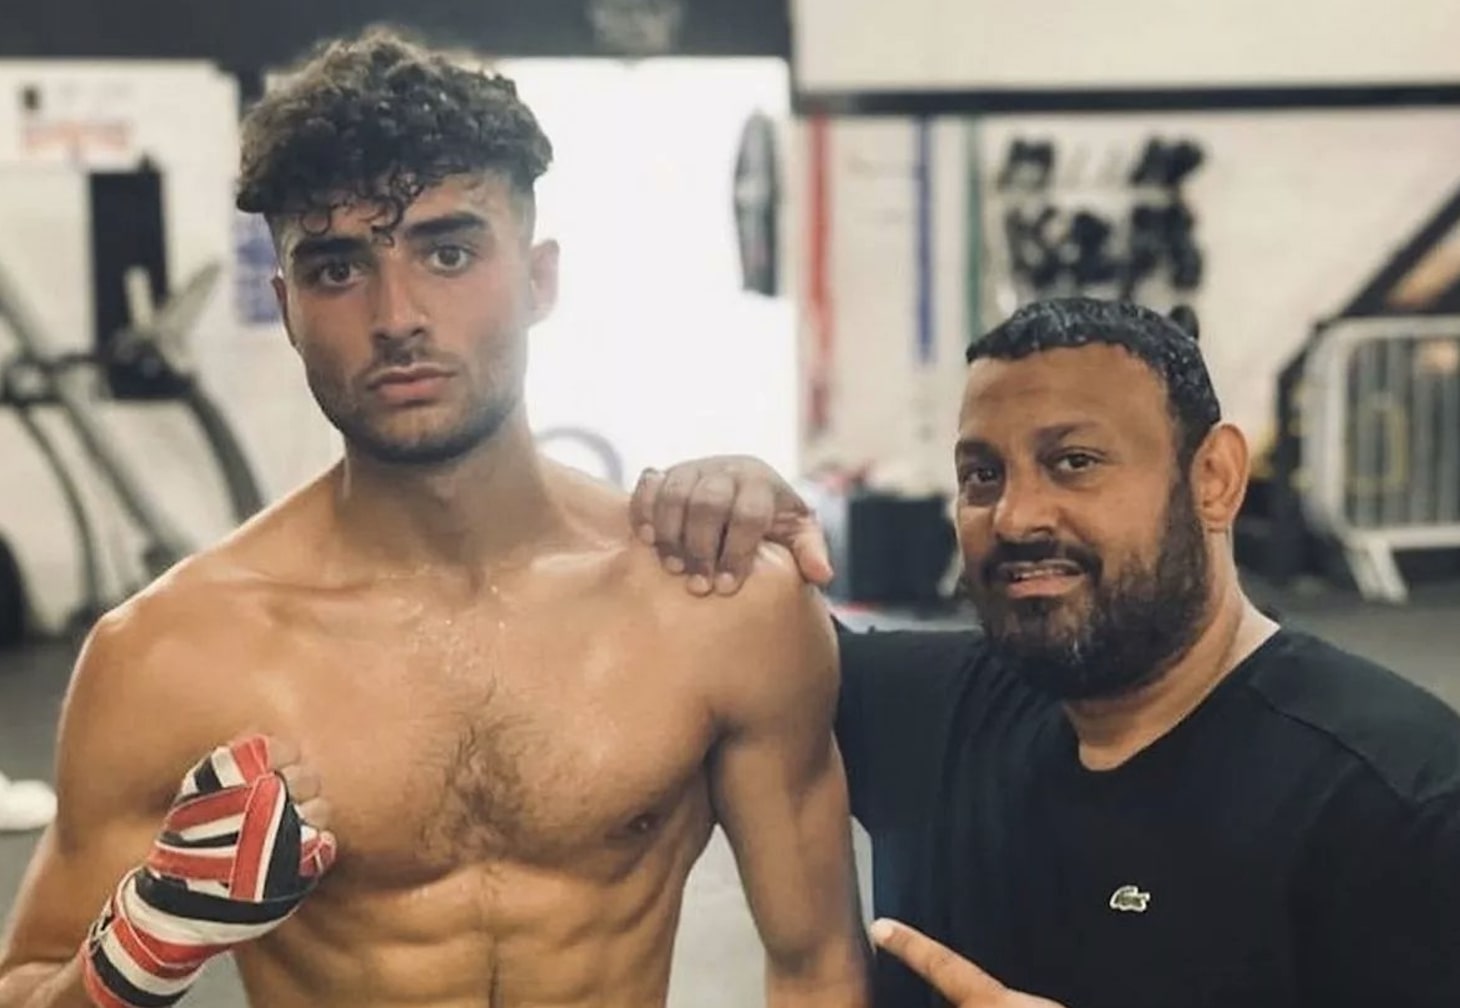 Hamed plans to follow the example set by Benn, not Eubank